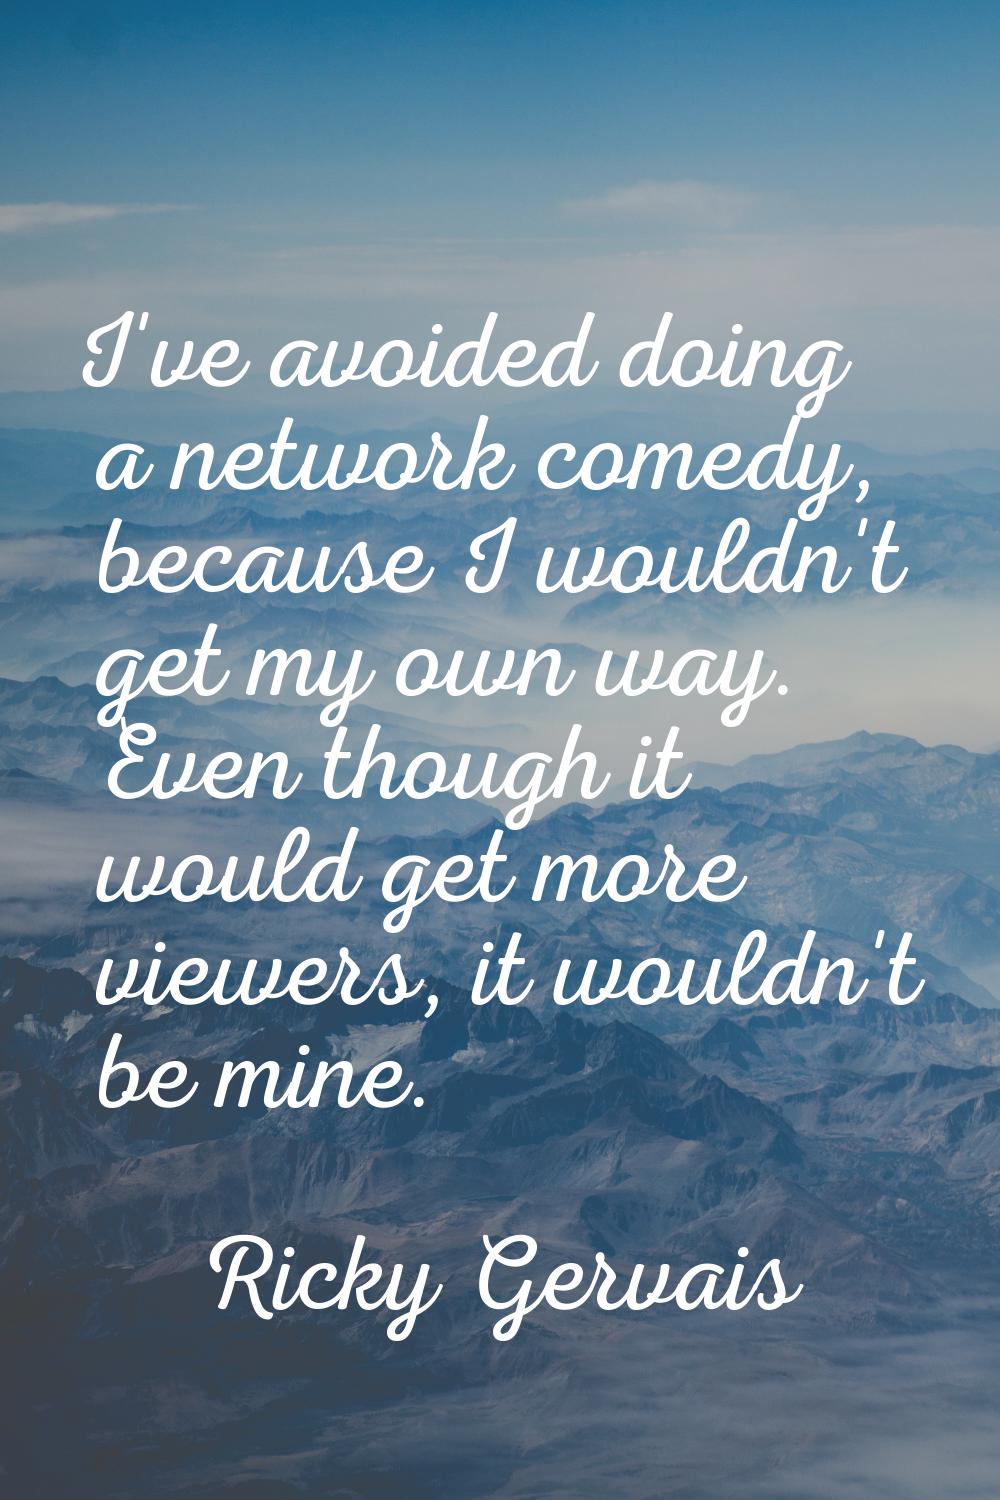 I've avoided doing a network comedy, because I wouldn't get my own way. Even though it would get mo